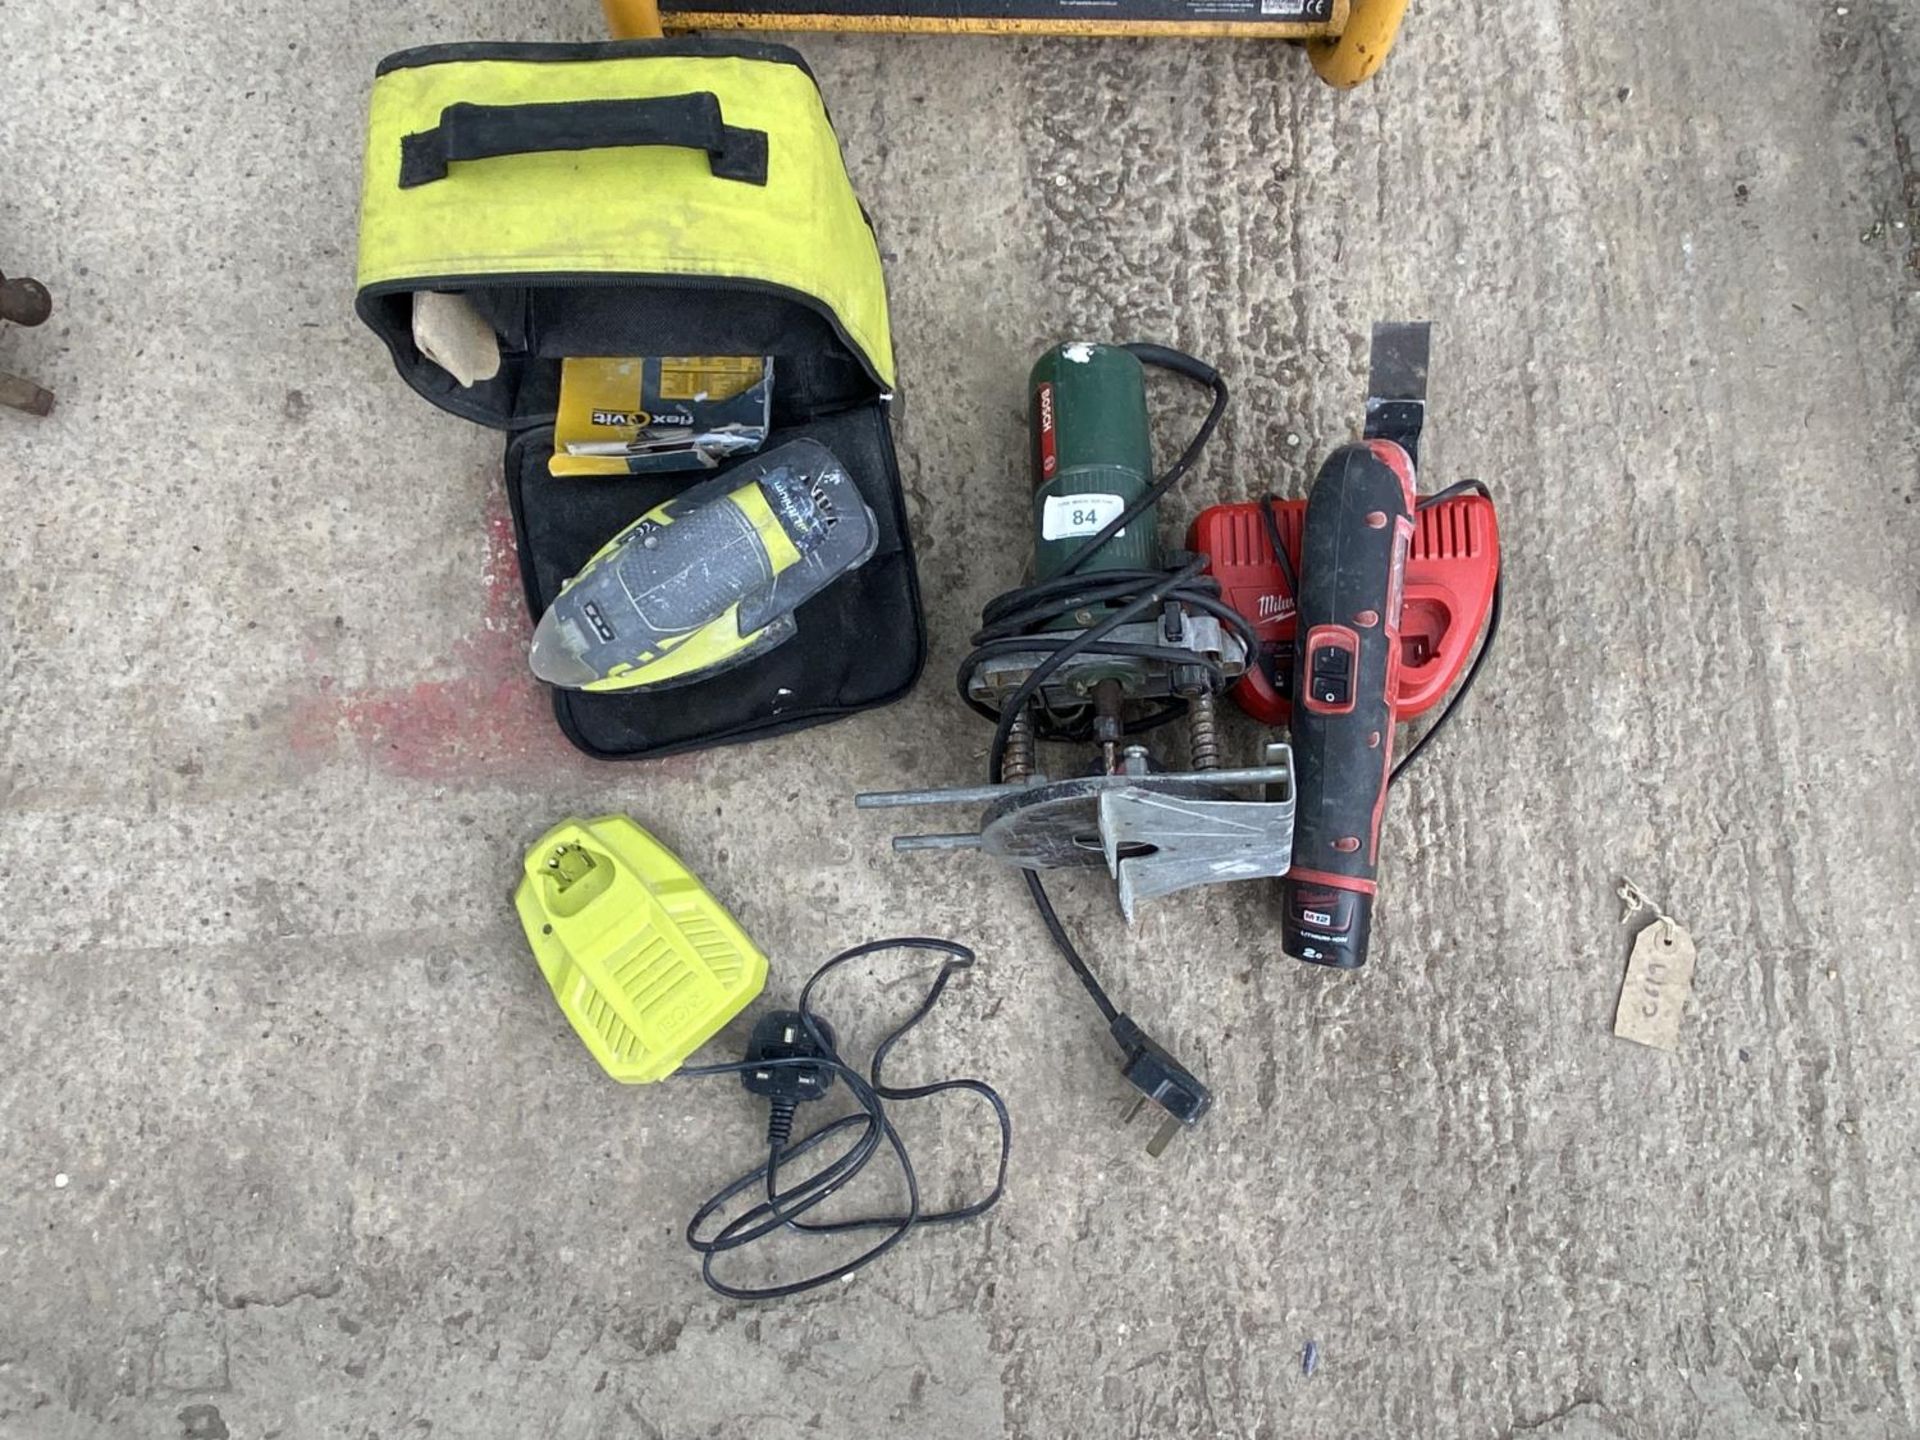 MILWAUKEE 12V MULTI PURPOSE CUTTER WITH CHARGER & A RYOBI PALM SANDER WITH CHARGER & A BOSCH